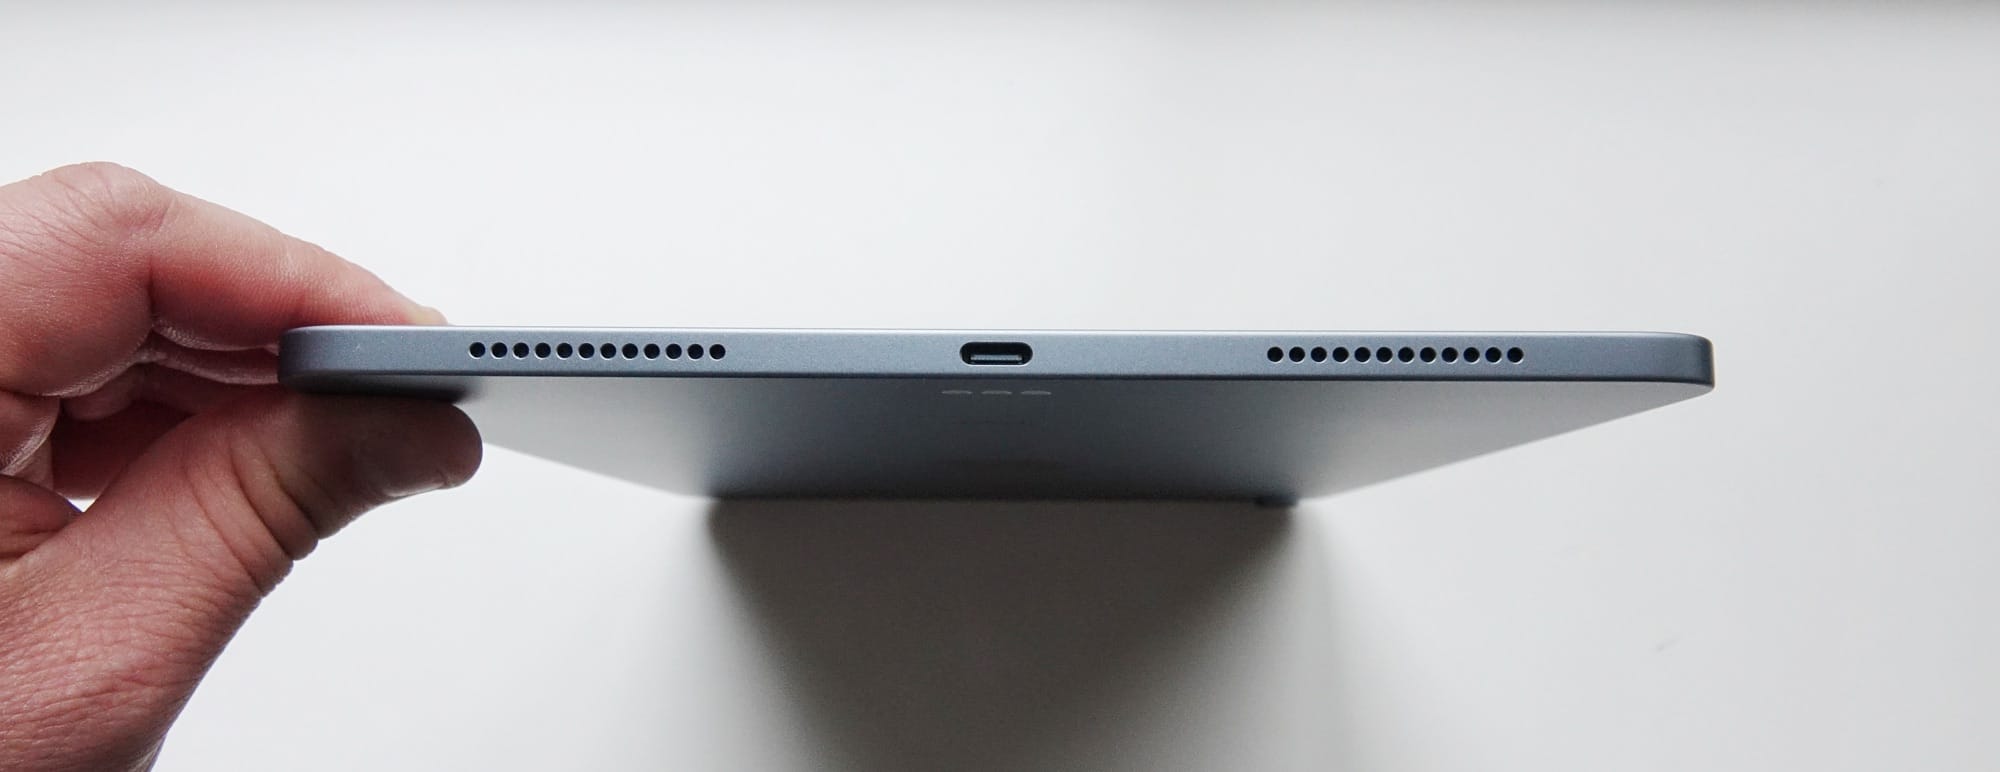 The Type C port of the iPad Air